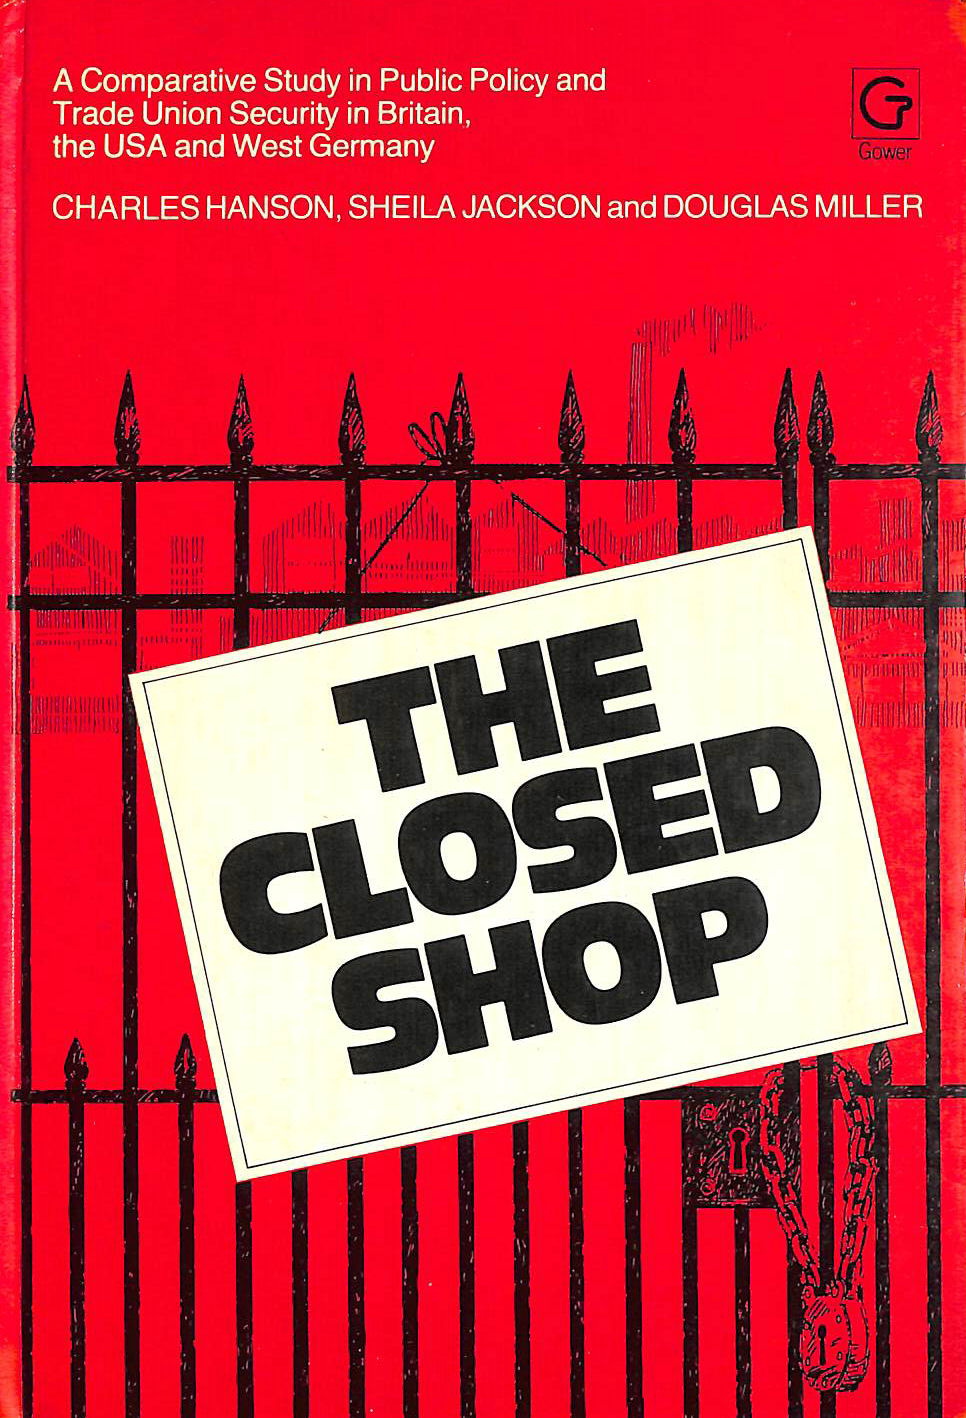  - Closed Shop: A Comparative Study in Public Policy and Trade Union Security in Britain, the U.S.A.and West Germany